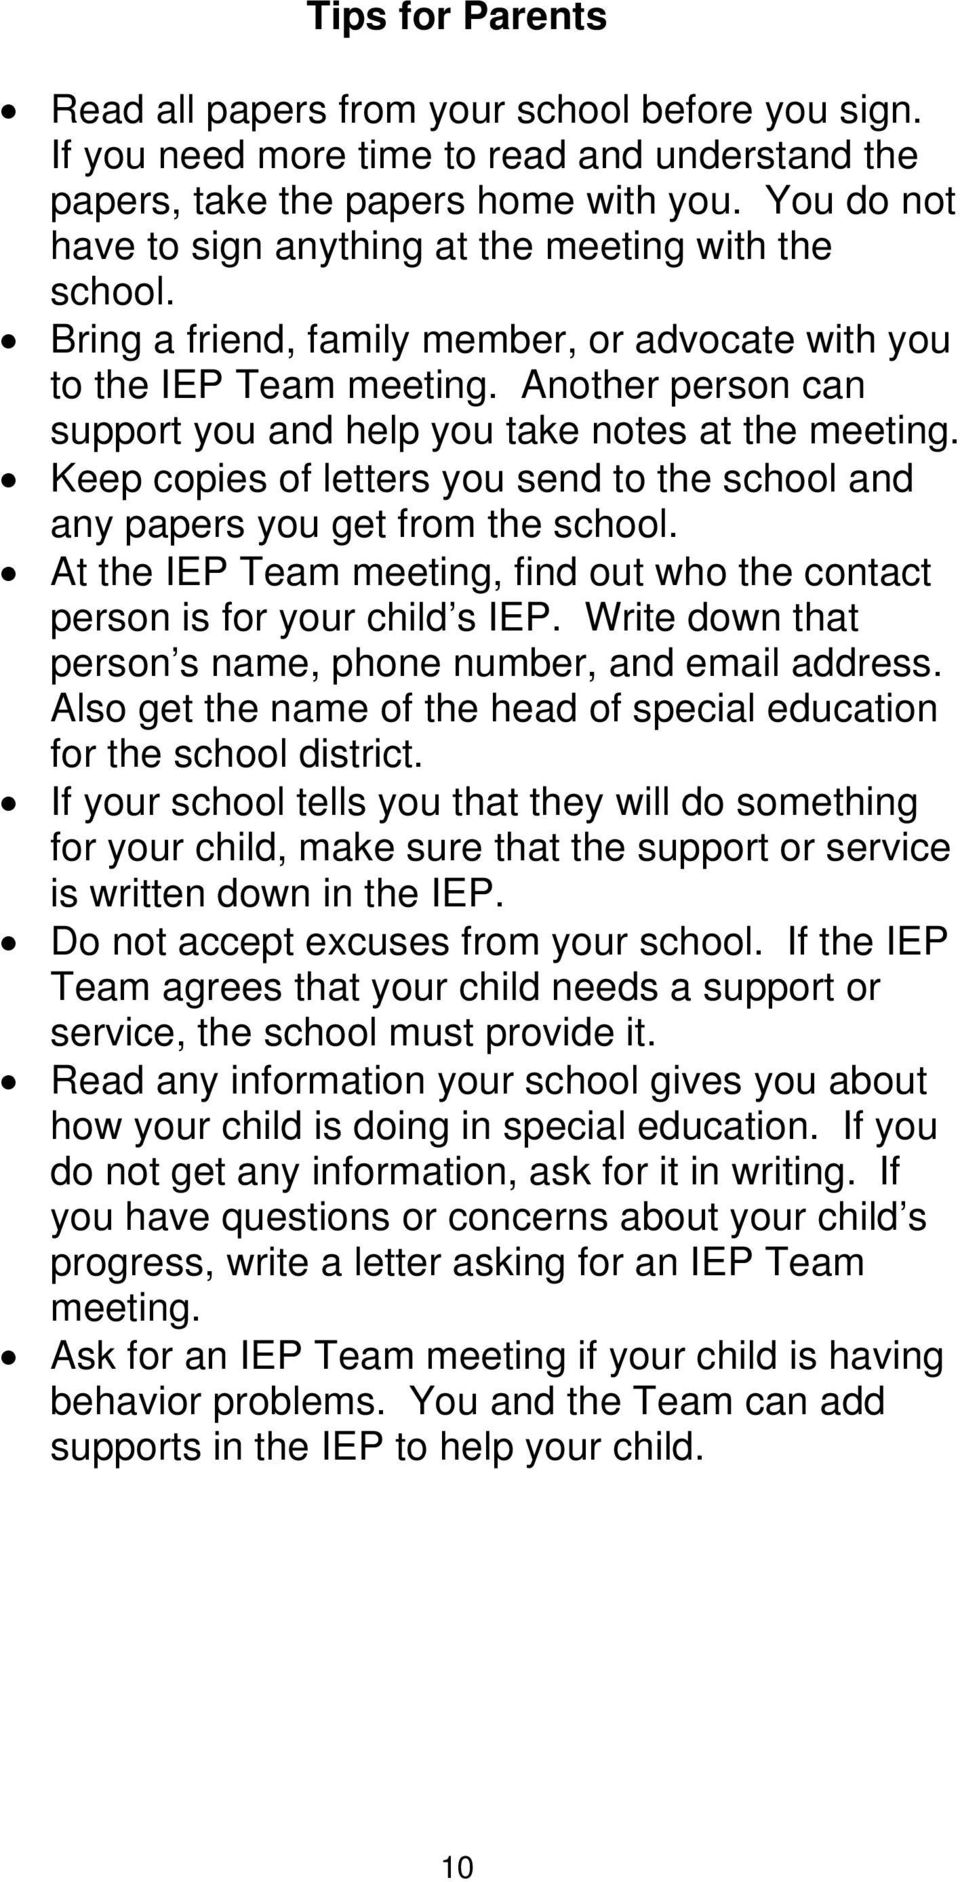 Another person can support you and help you take notes at the meeting. Keep copies of letters you send to the school and any papers you get from the school.